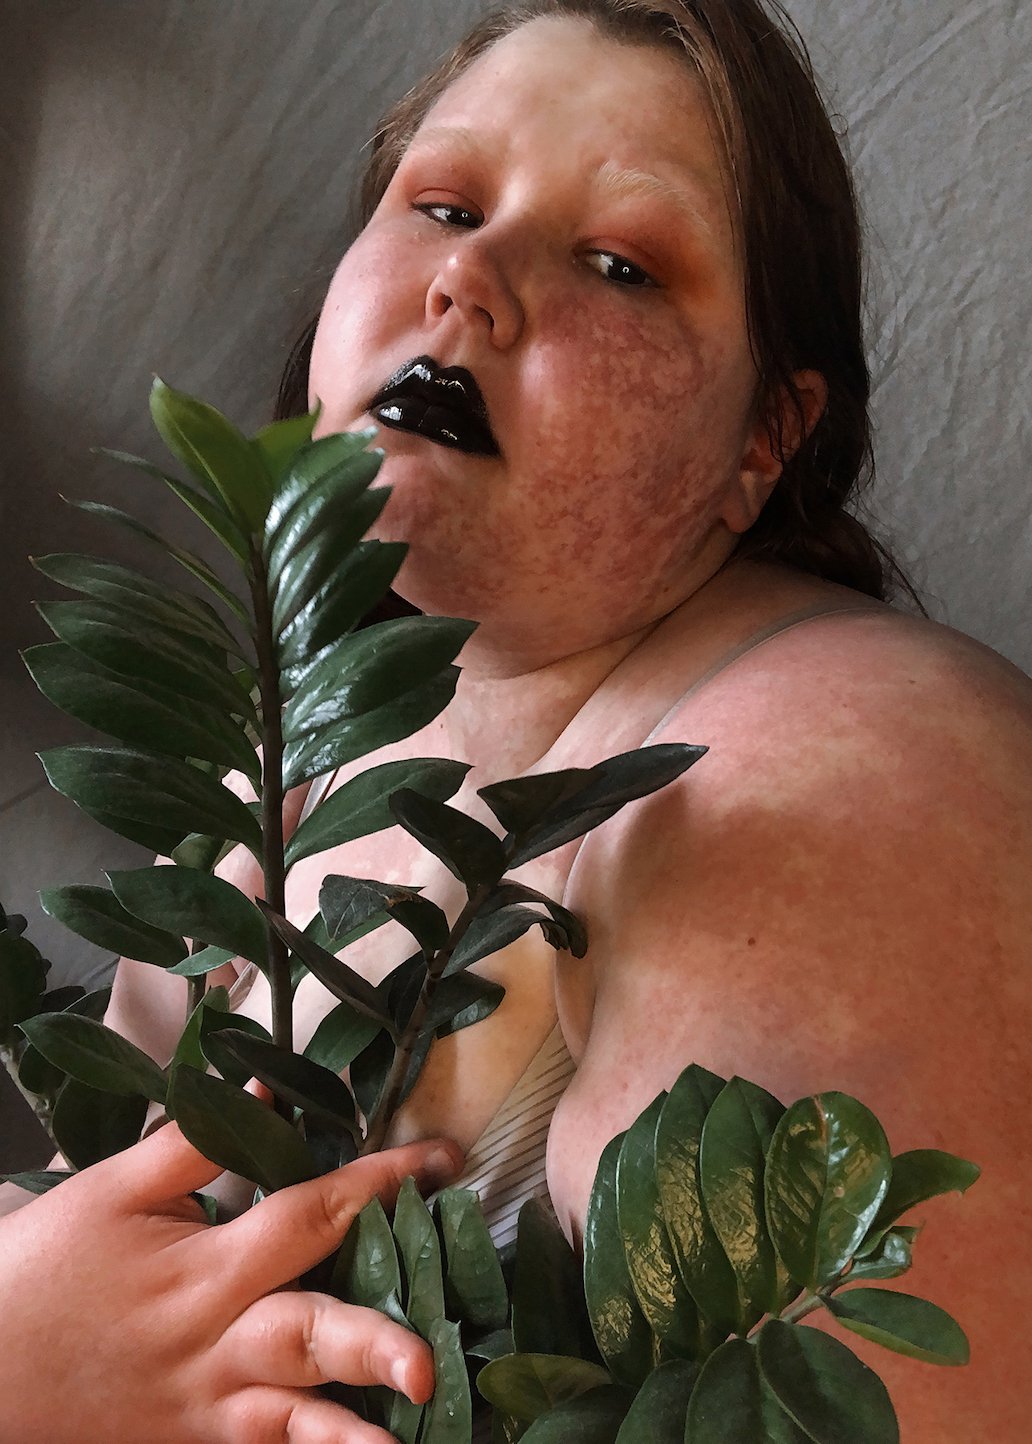 <p><b></b></p>

<p><span>This is a self-portrait by Miliyollie, a body-positivity activist and photographer based in St Petersburg. Miliyollie’s work pushes back against the rigid boundaries of Russia’s conservative patriarchy, documenting the country’s body-positive, feminist, and queer communities, and proving that all bodies deserve equal respect and representation. </span></p>